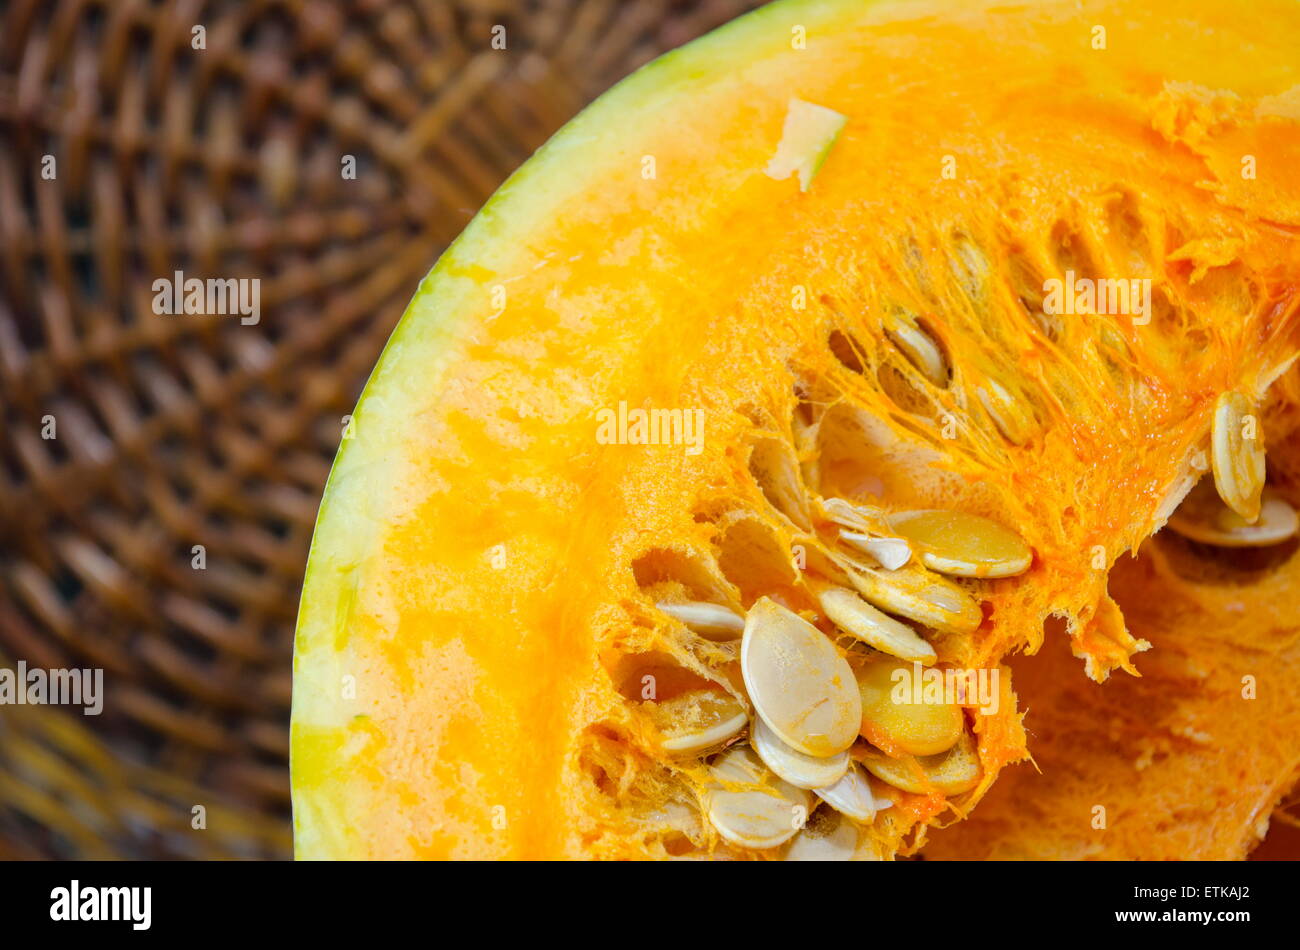 Ripe halved pumpkin against a wooden surface Stock Photo